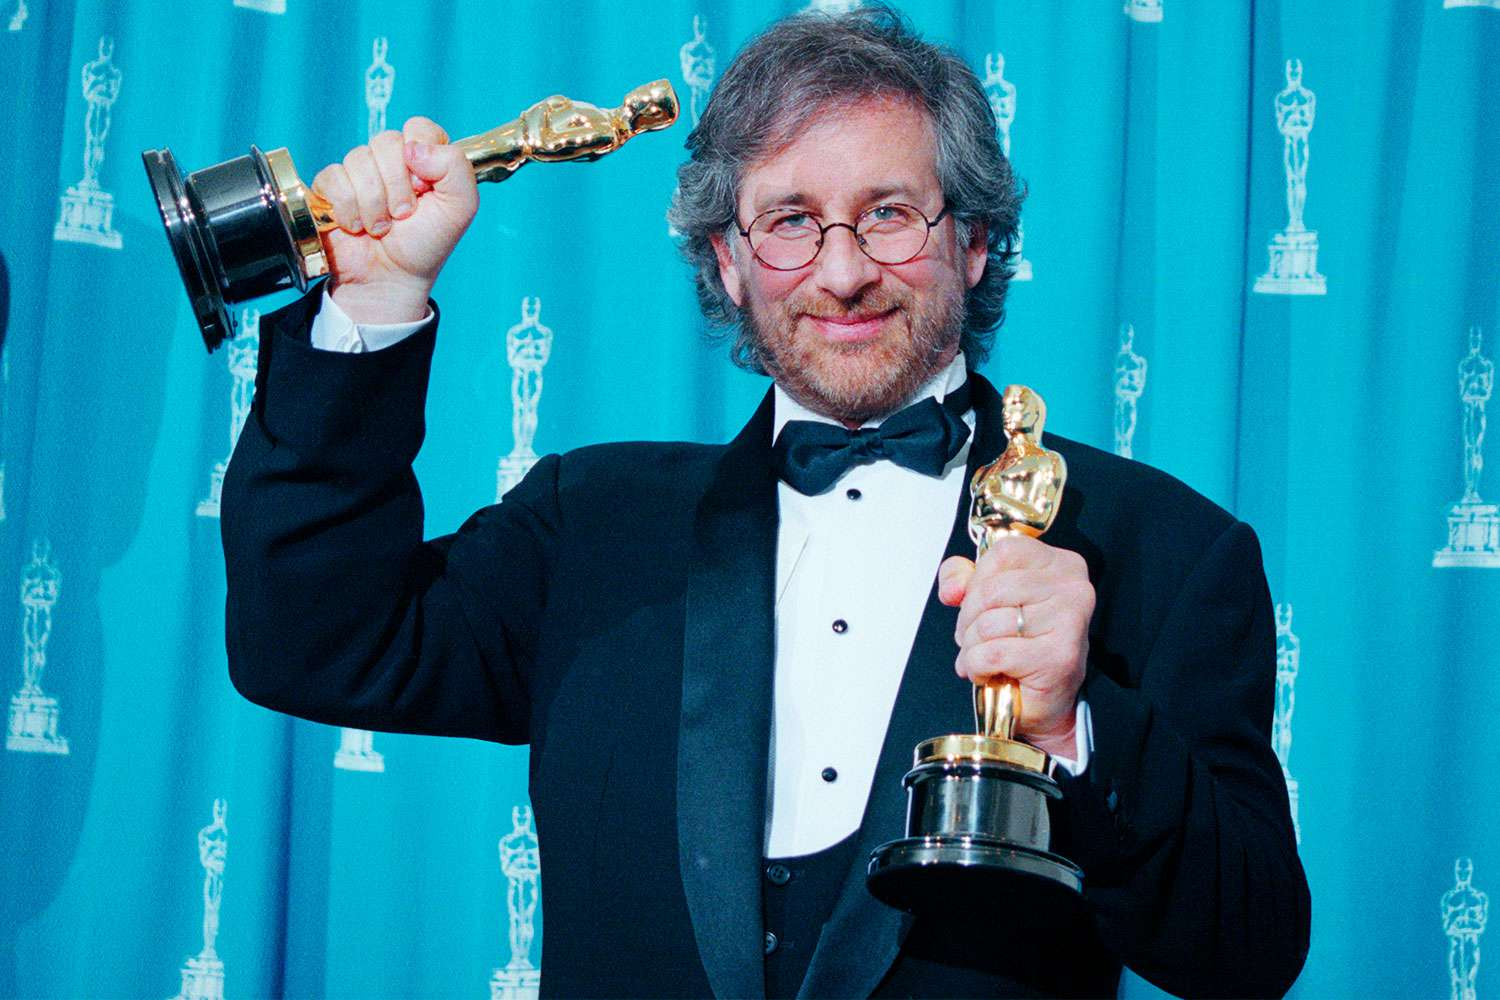 Steven Spielberg with his Oscars 